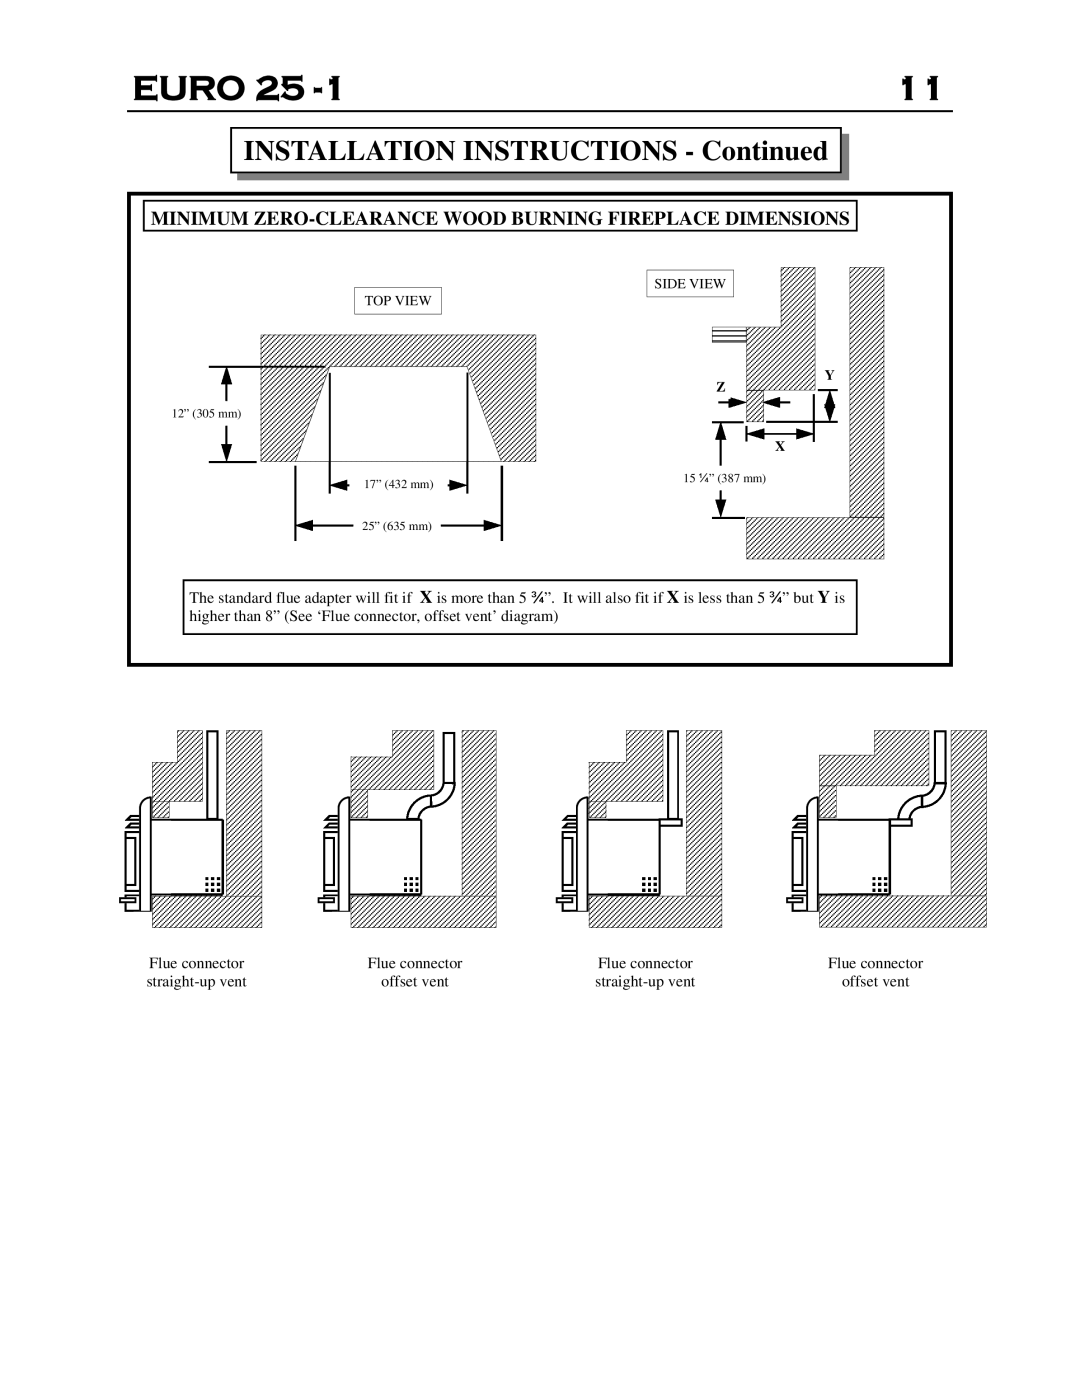 Delkin Devices EI - 25-1 manual Euro, INSTALLATION INSTRUCTIONS - Continued, 15 ¼” 387 mm 